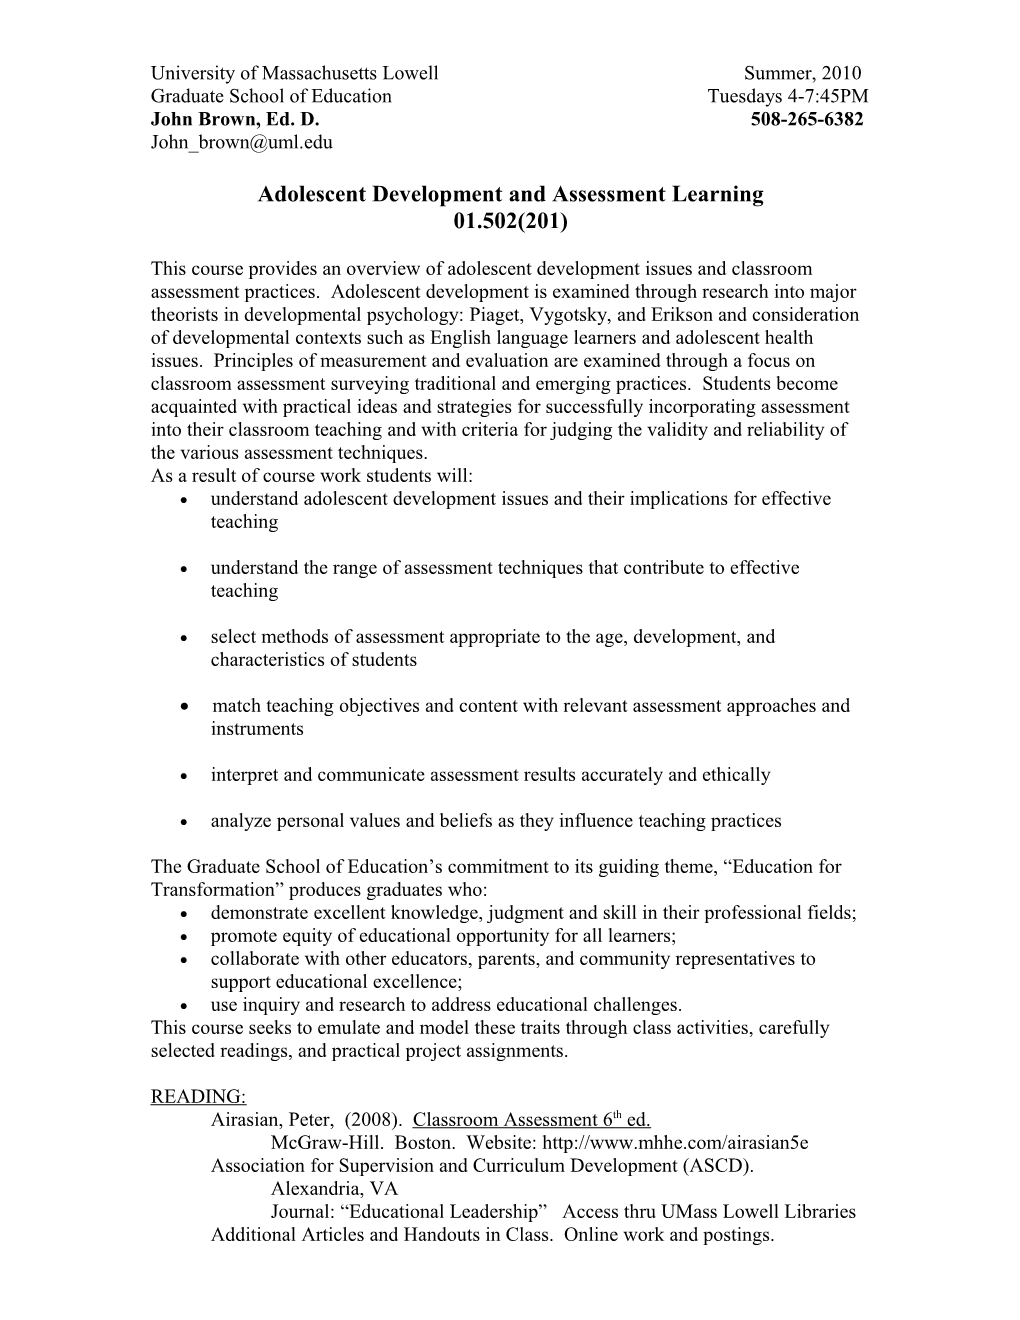 Child Development and Assessment for Learning